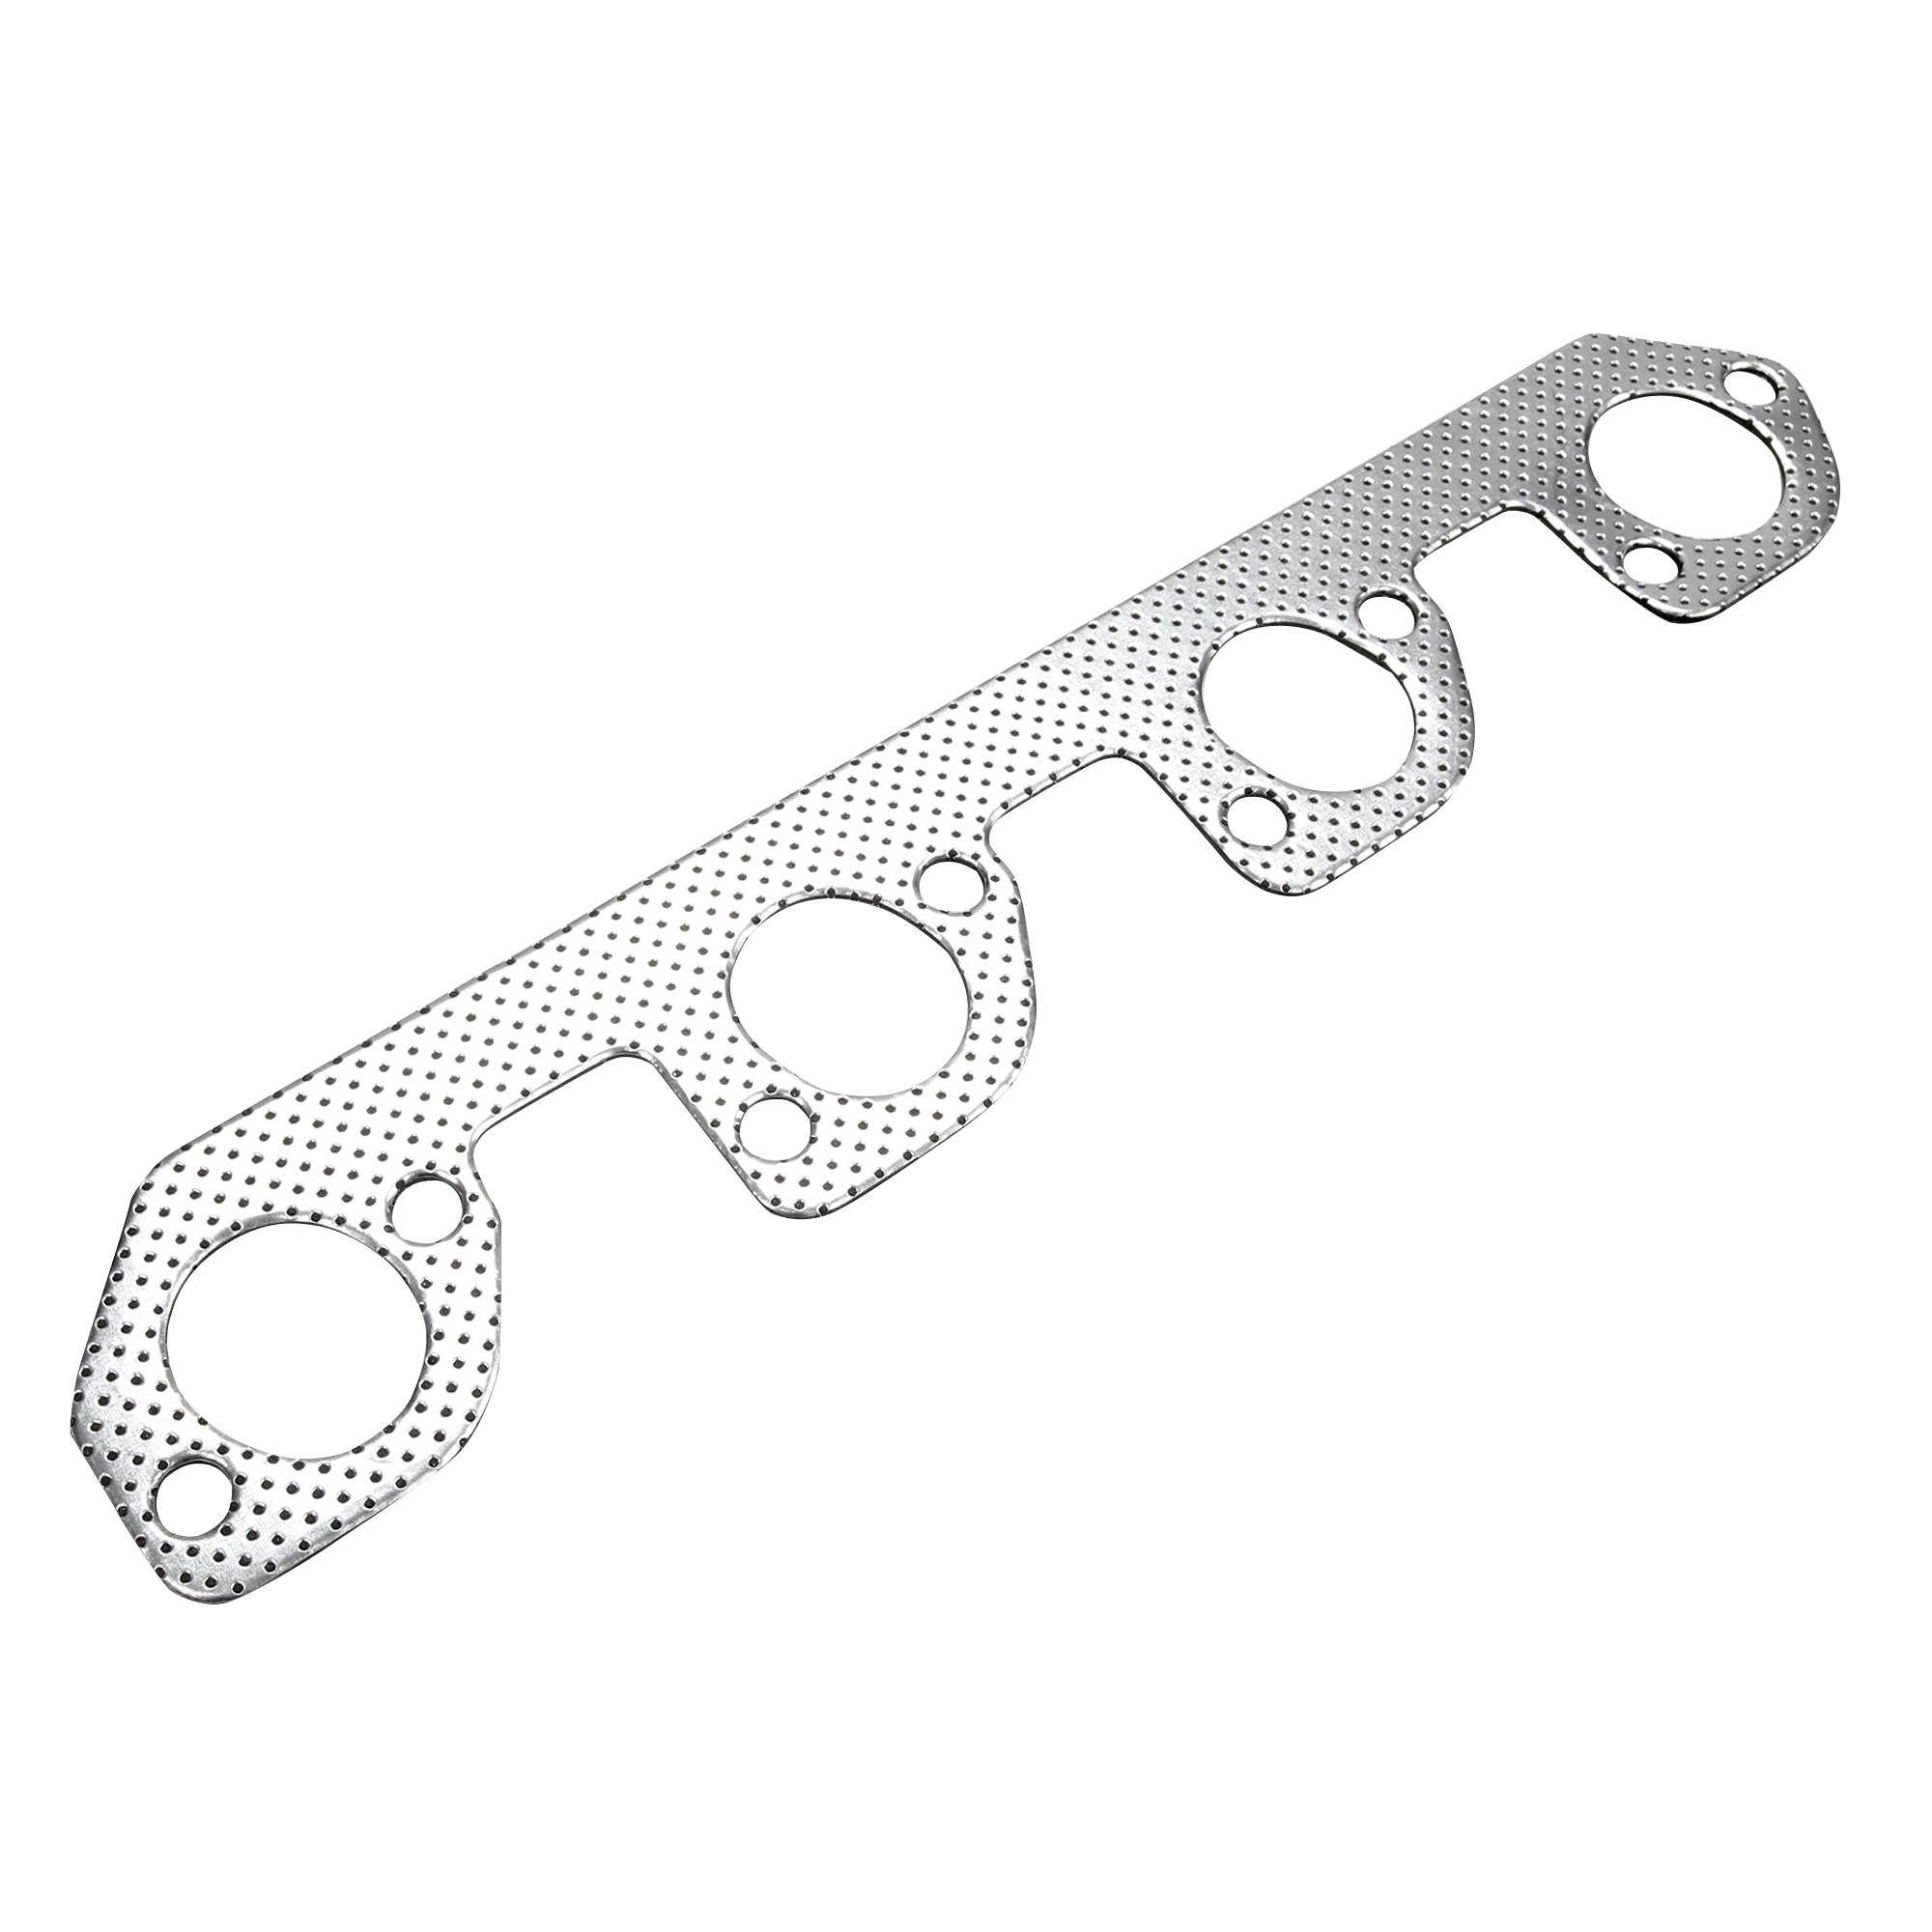 Stainless Exhaust Manifold Header for 1974-1980 Ford Pinto Mustang 2.3L